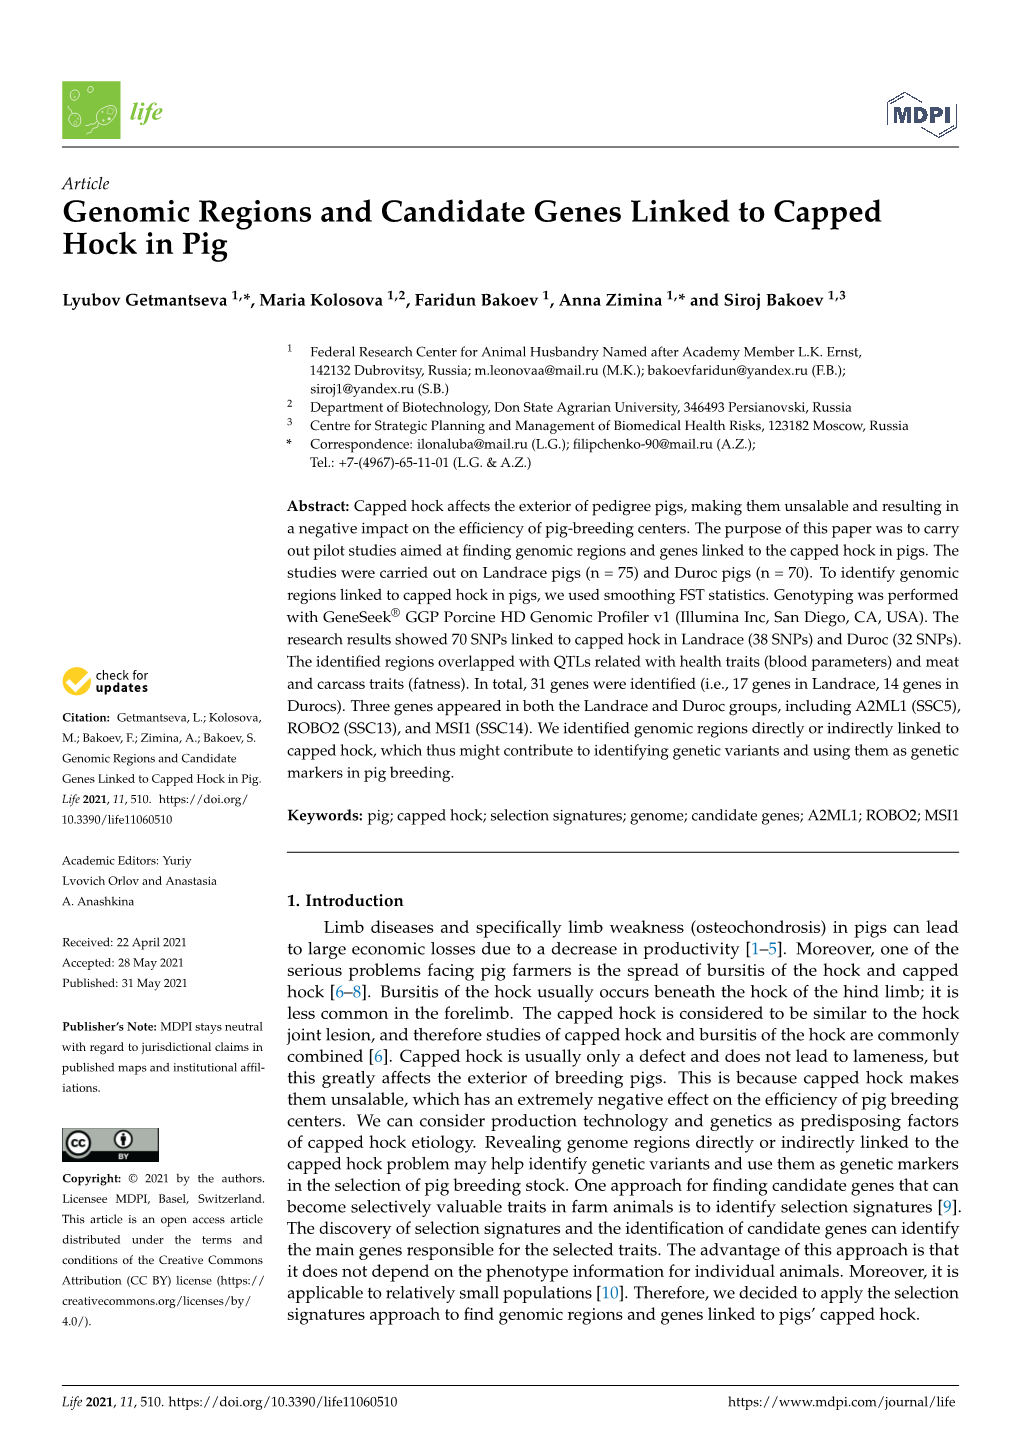 Genomic Regions and Candidate Genes Linked to Capped Hock in Pig